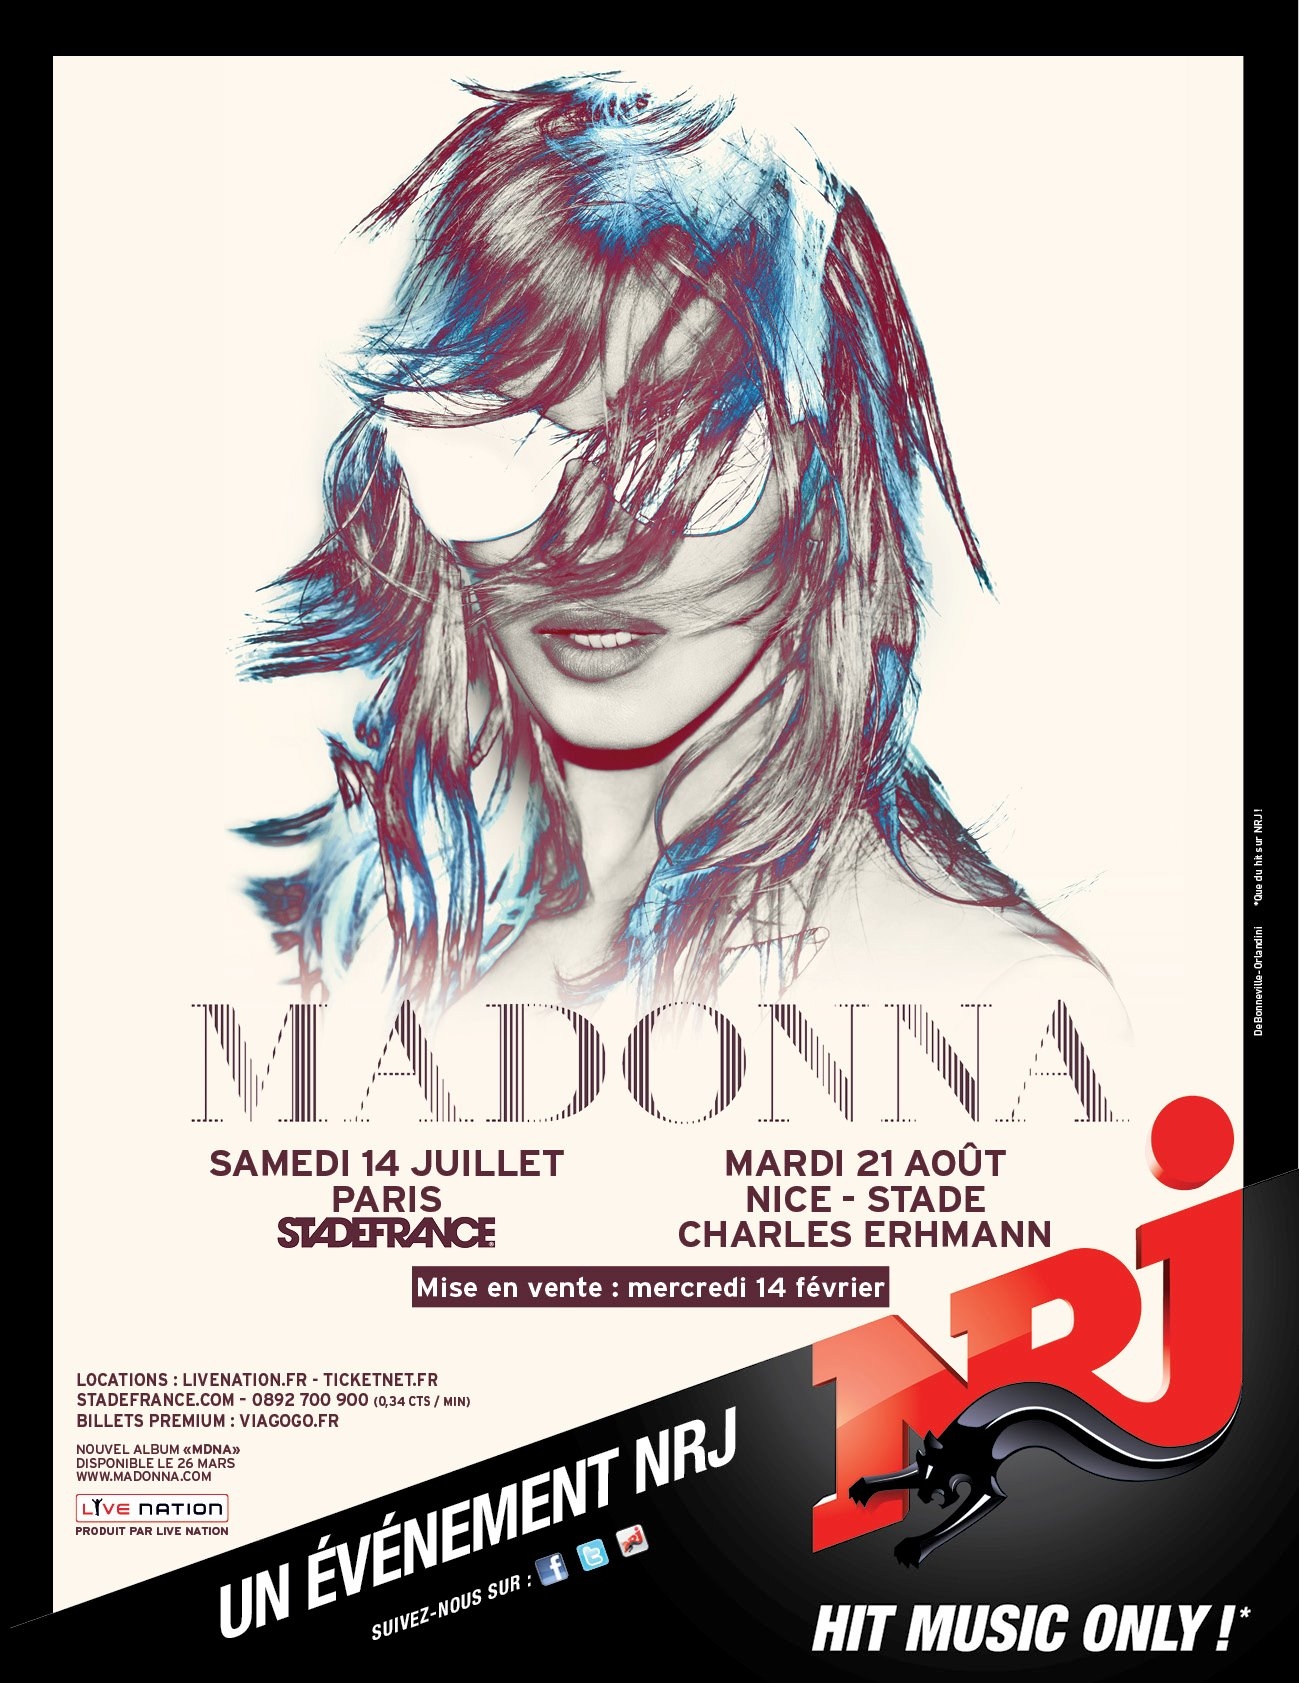 20120209-pictures-madonna-world-tour-posters-france-02.jpg